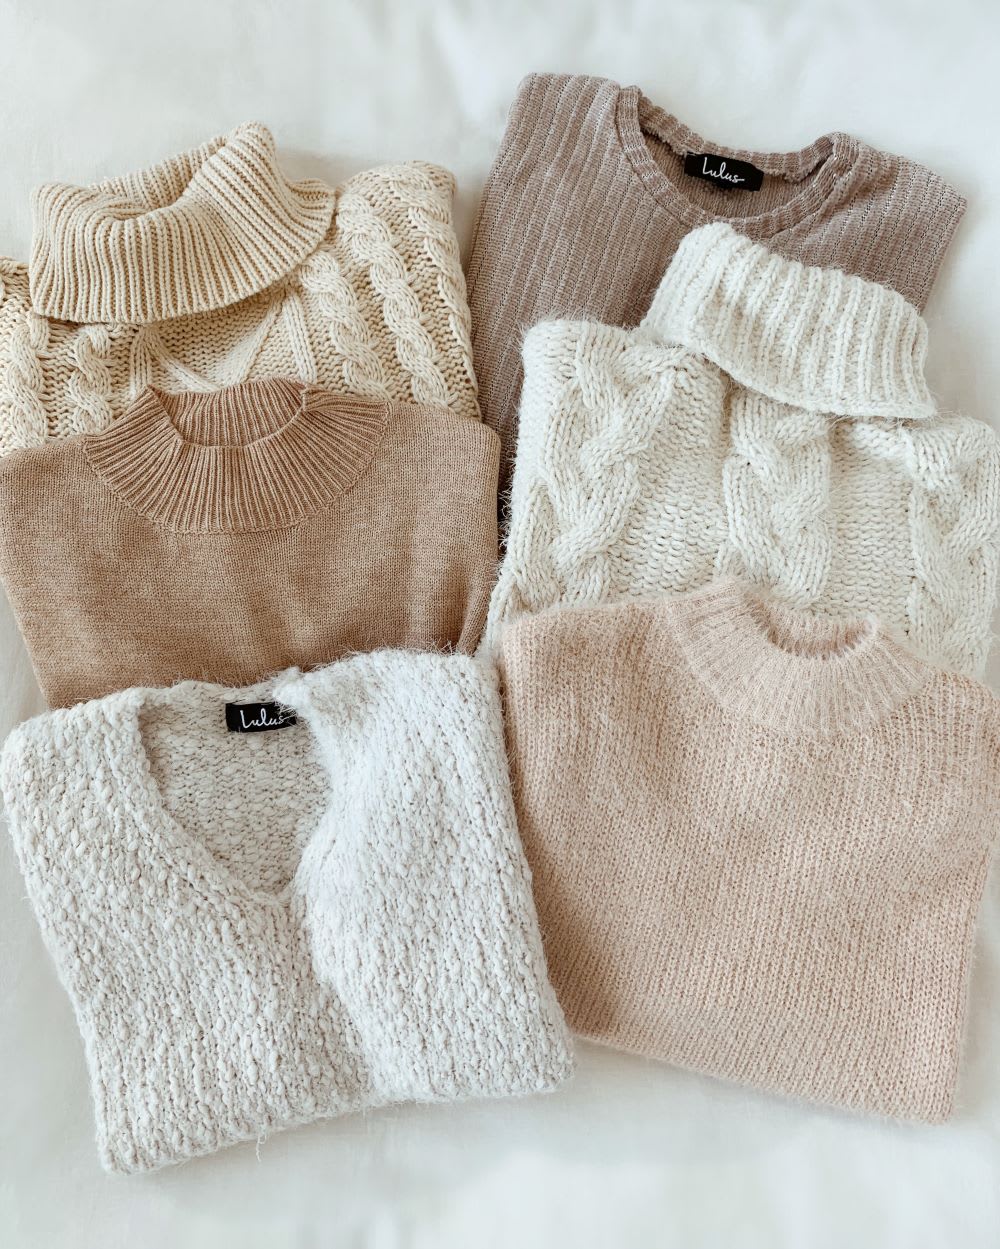 Cozy Winter Sweaters Outlet - www.cryslercommunitycenter.com 1694578960